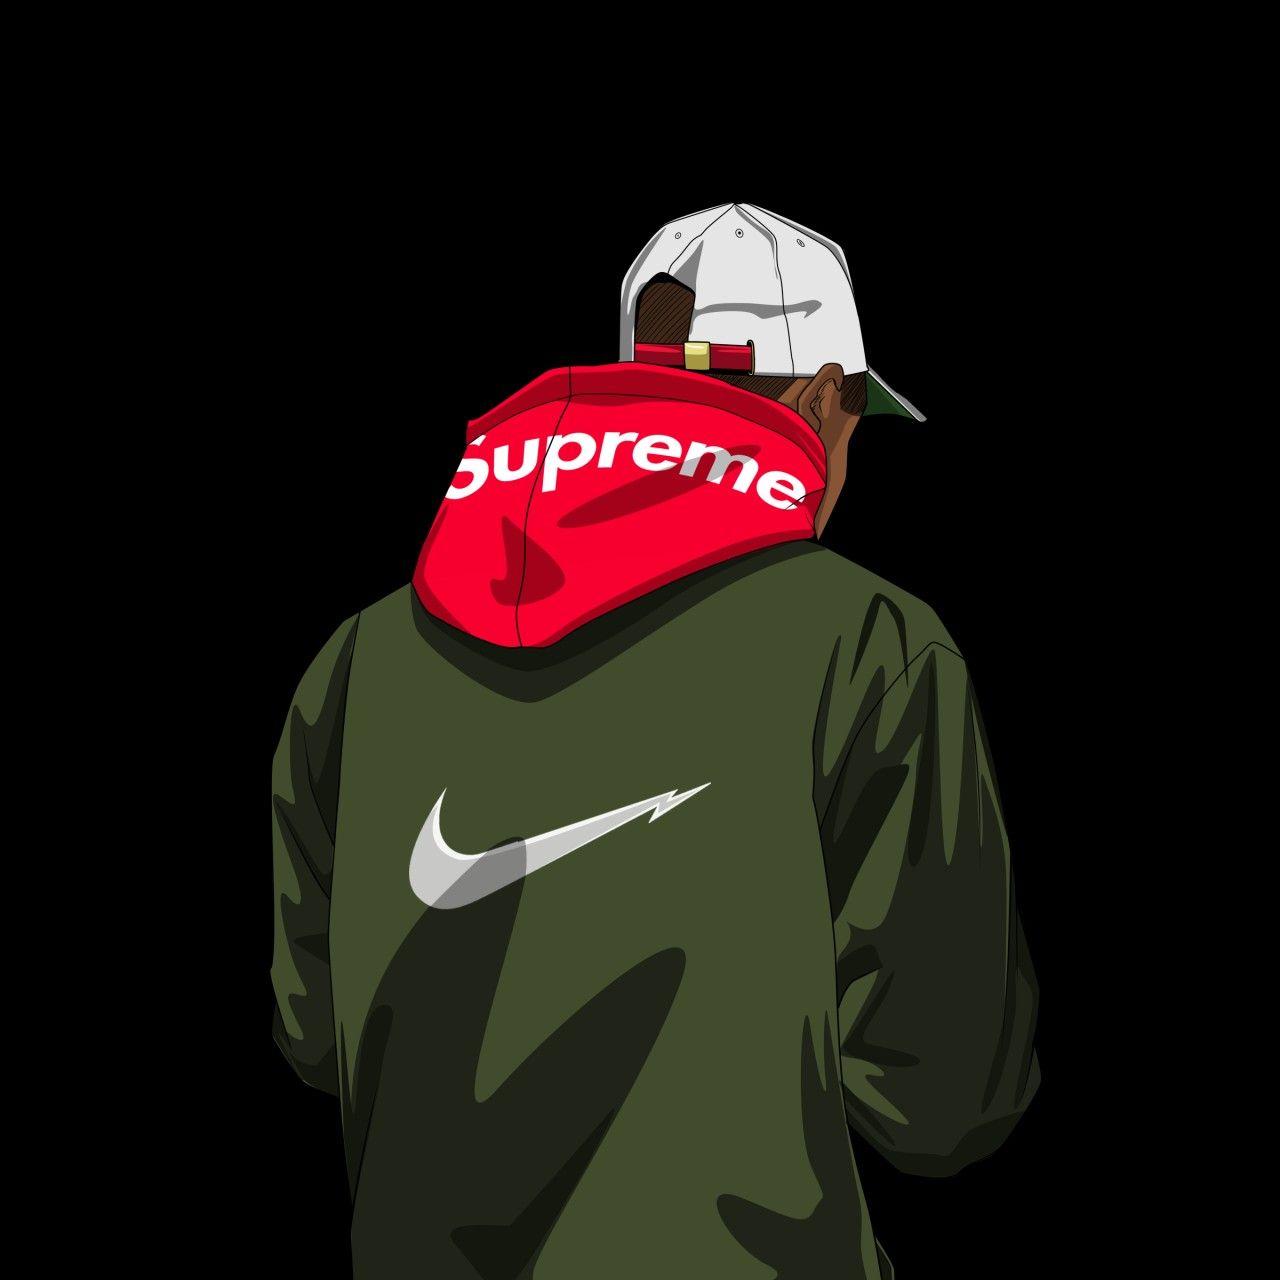 Dope Supreme Wallpapers - Top Free Dope Supreme Backgrounds